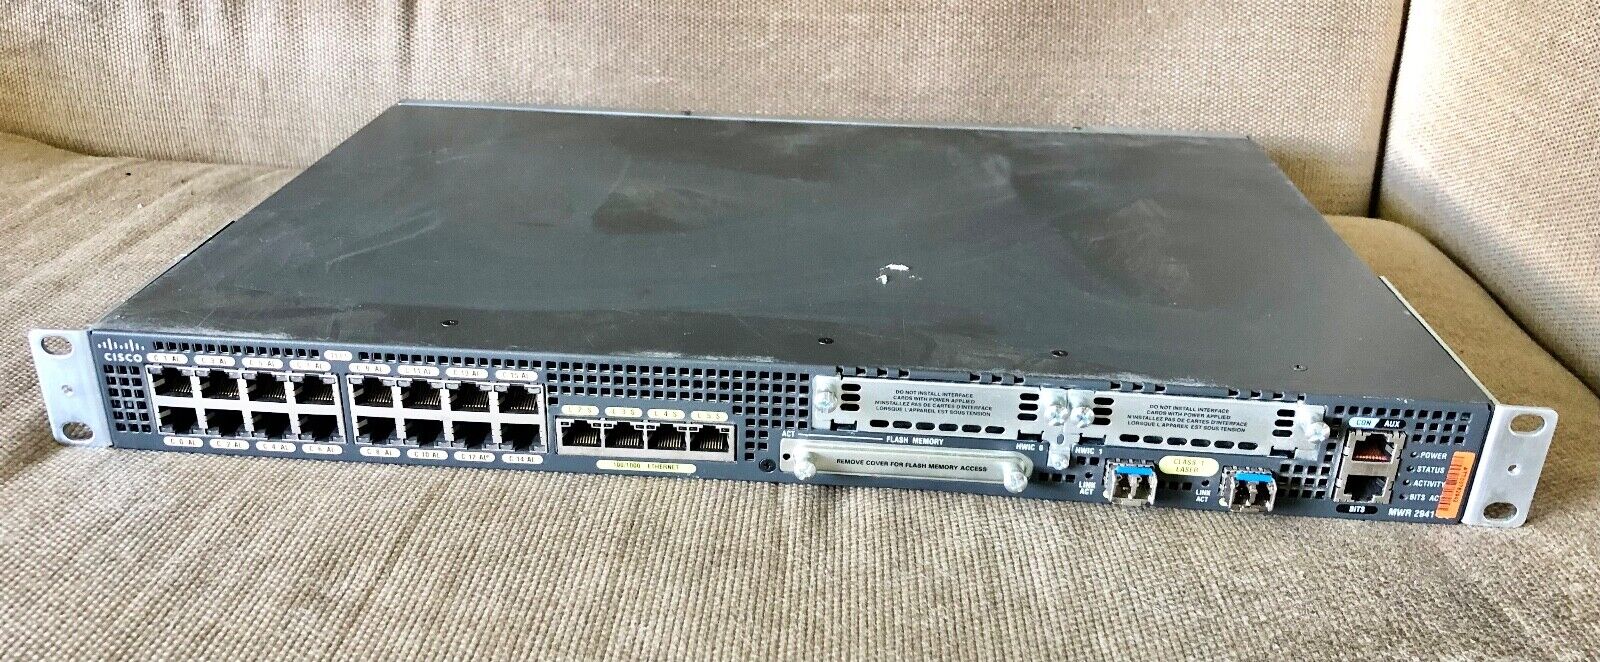 CISCO MWR-2941-DC-A 100 Mbps 100/1000 Wireless Router - Untested - For Parts